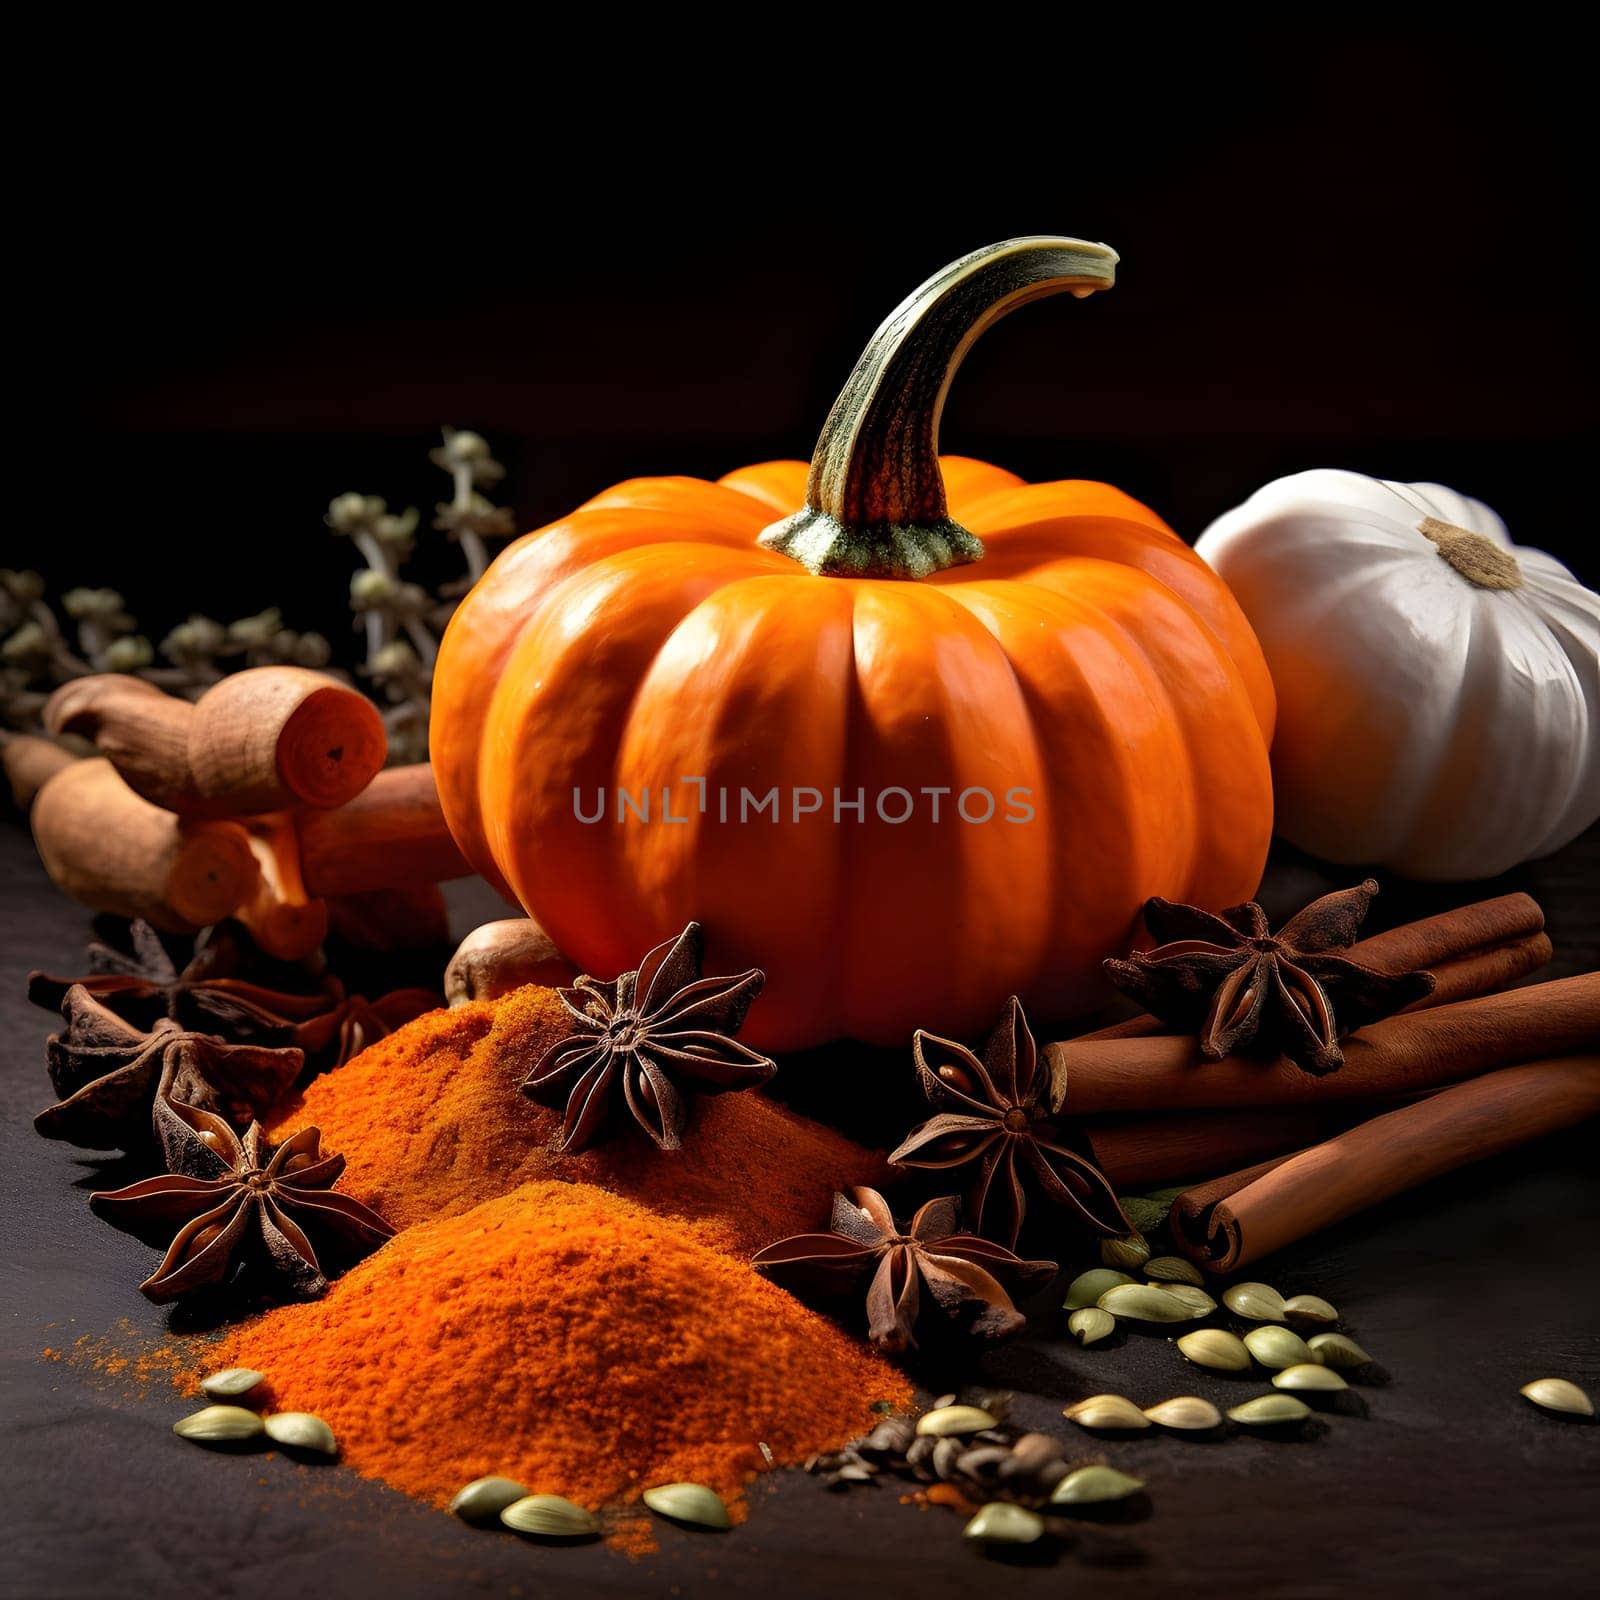 Two pumpkins, one white, one orange all around, pumpkin sprinkles and stars and seeds. Black background. Pumpkin as a dish of thanksgiving for the harvest. An atmosphere of joy and celebration.